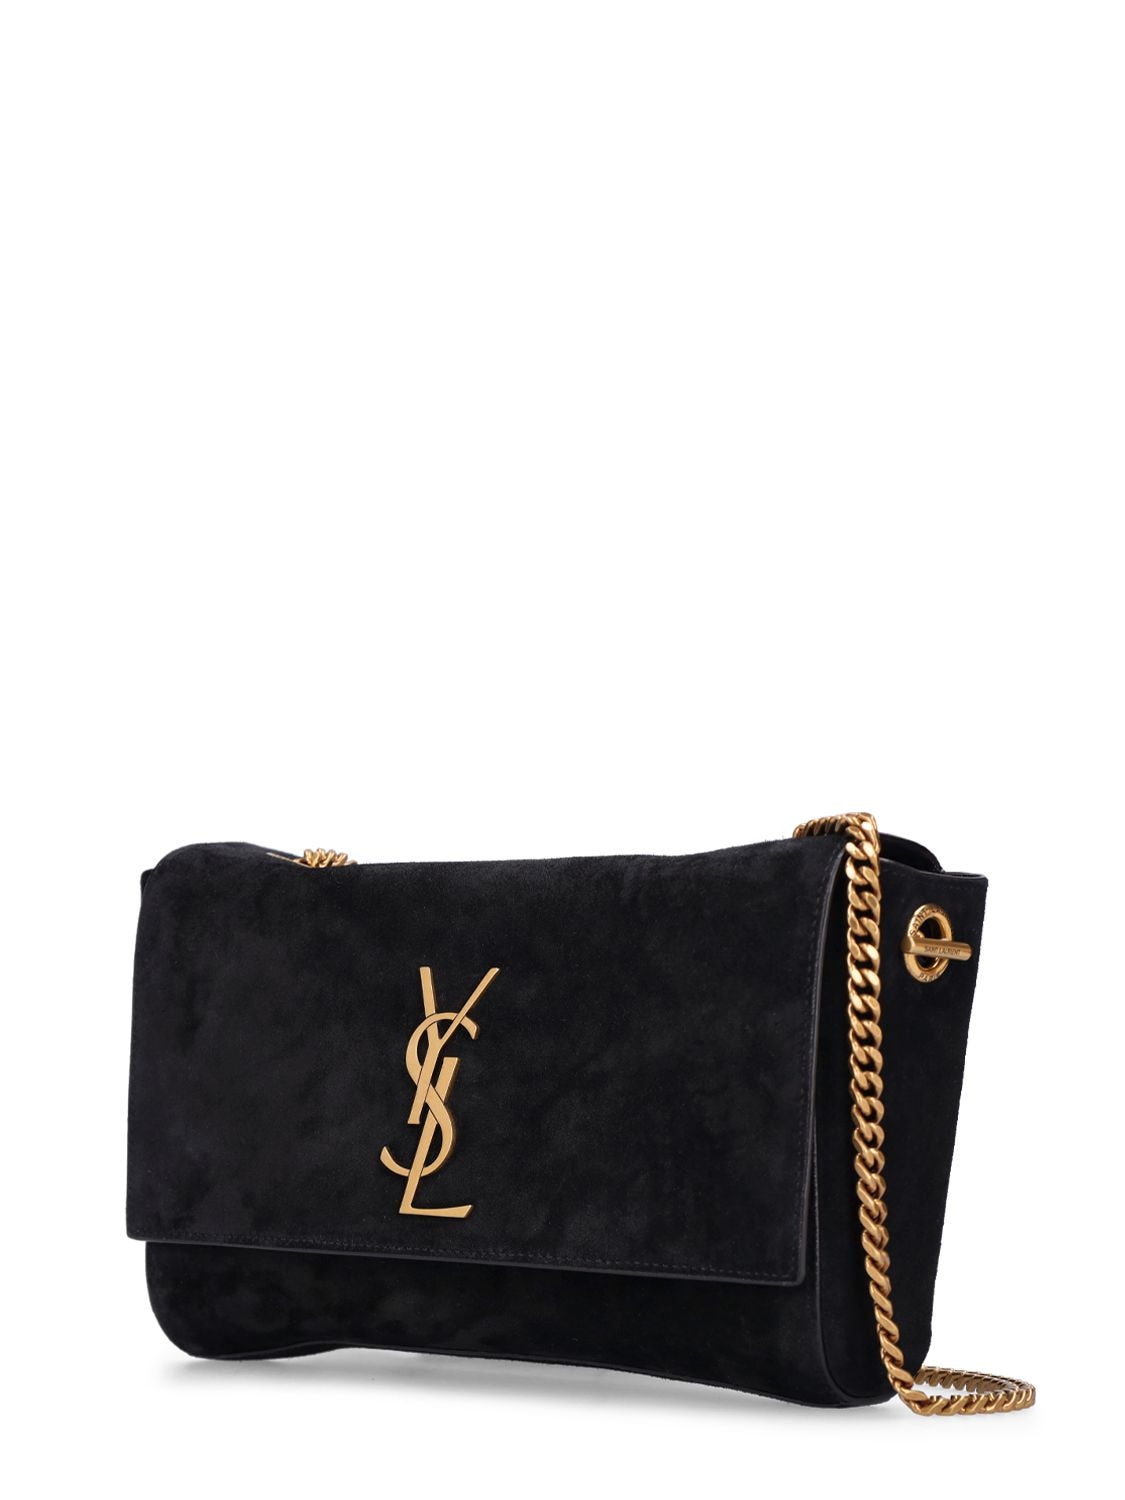 Simply Beauty - 😍 rm4990 only for YSL WOC large